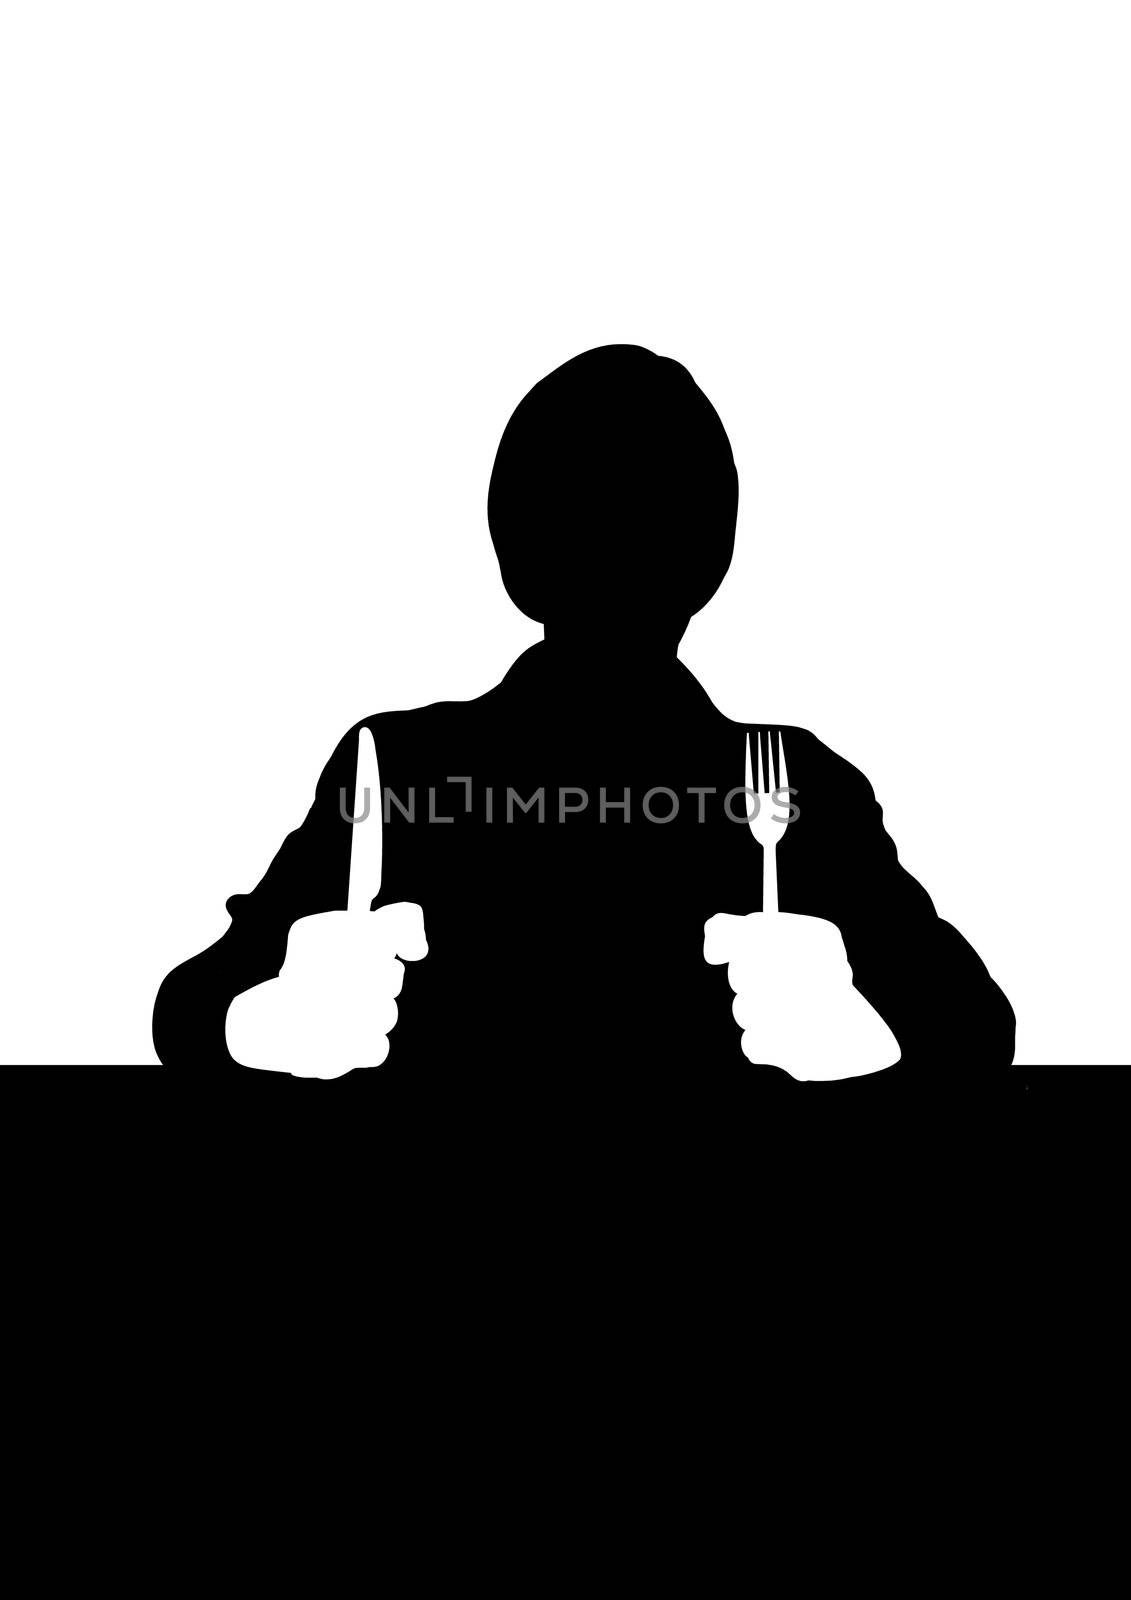 Illustration of a person holding a knife and fork, sitting at a table
